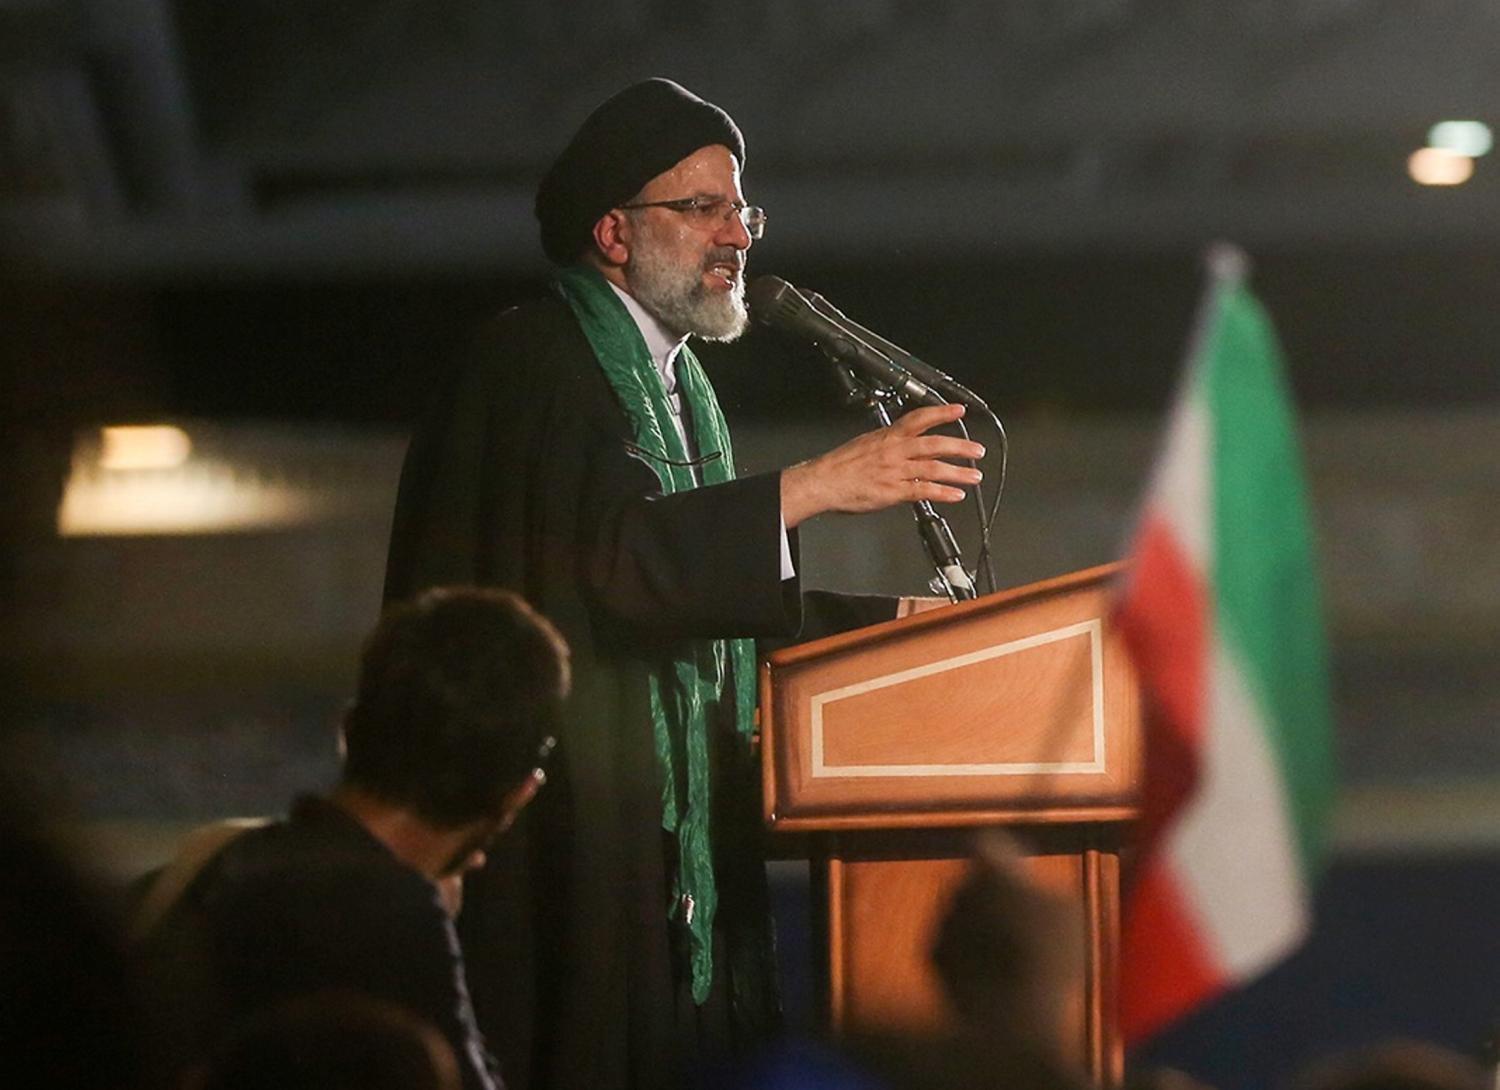 Iranian Presidential candidate Ebrahim Raisi speaks during a campaign meeting at the Mosalla mosque in Tehran, Iran, May 16, 2017. Picture taken May 16, 2017. TIMA via REUTERS ATTENTION EDITORS - THIS IMAGE WAS PROVIDED BY A THIRD PARTY. FOR EDITORIAL USE ONLY. - RTX36OGP